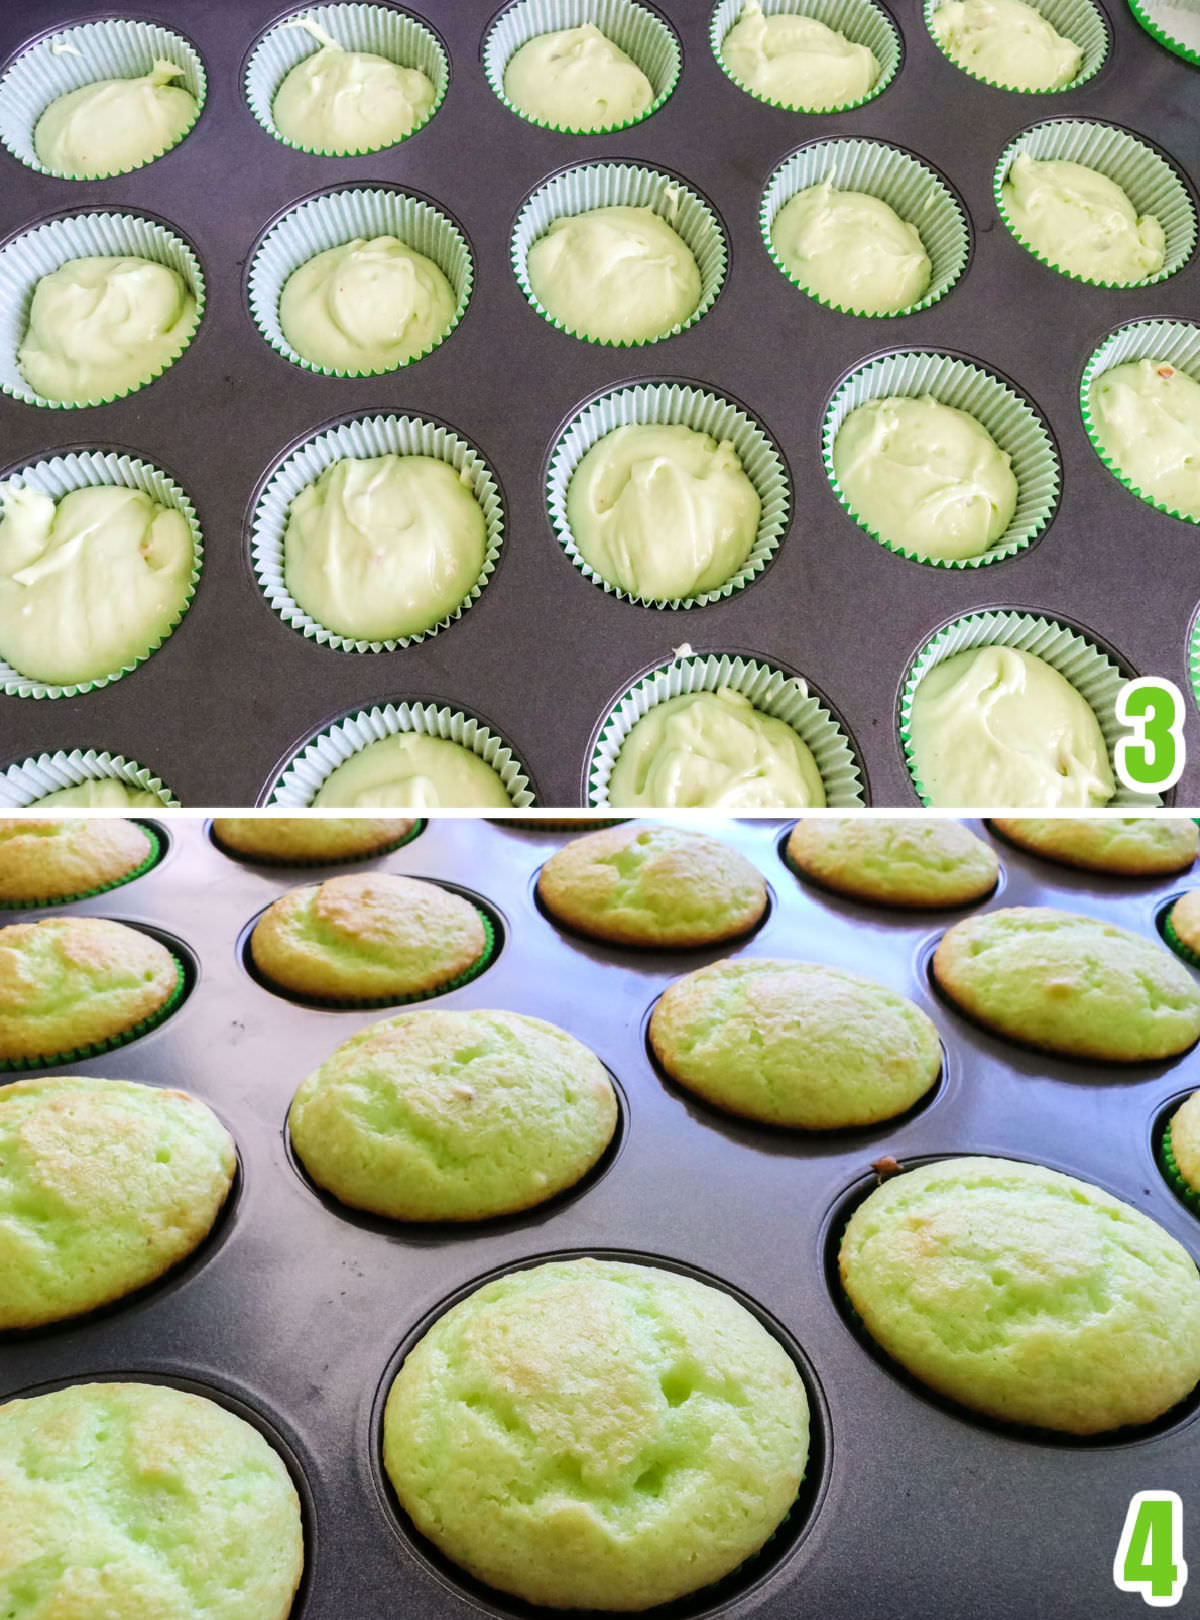 Collage image showing the Pistachio Cupcakes before they go in the oven and after they come out of the oven.